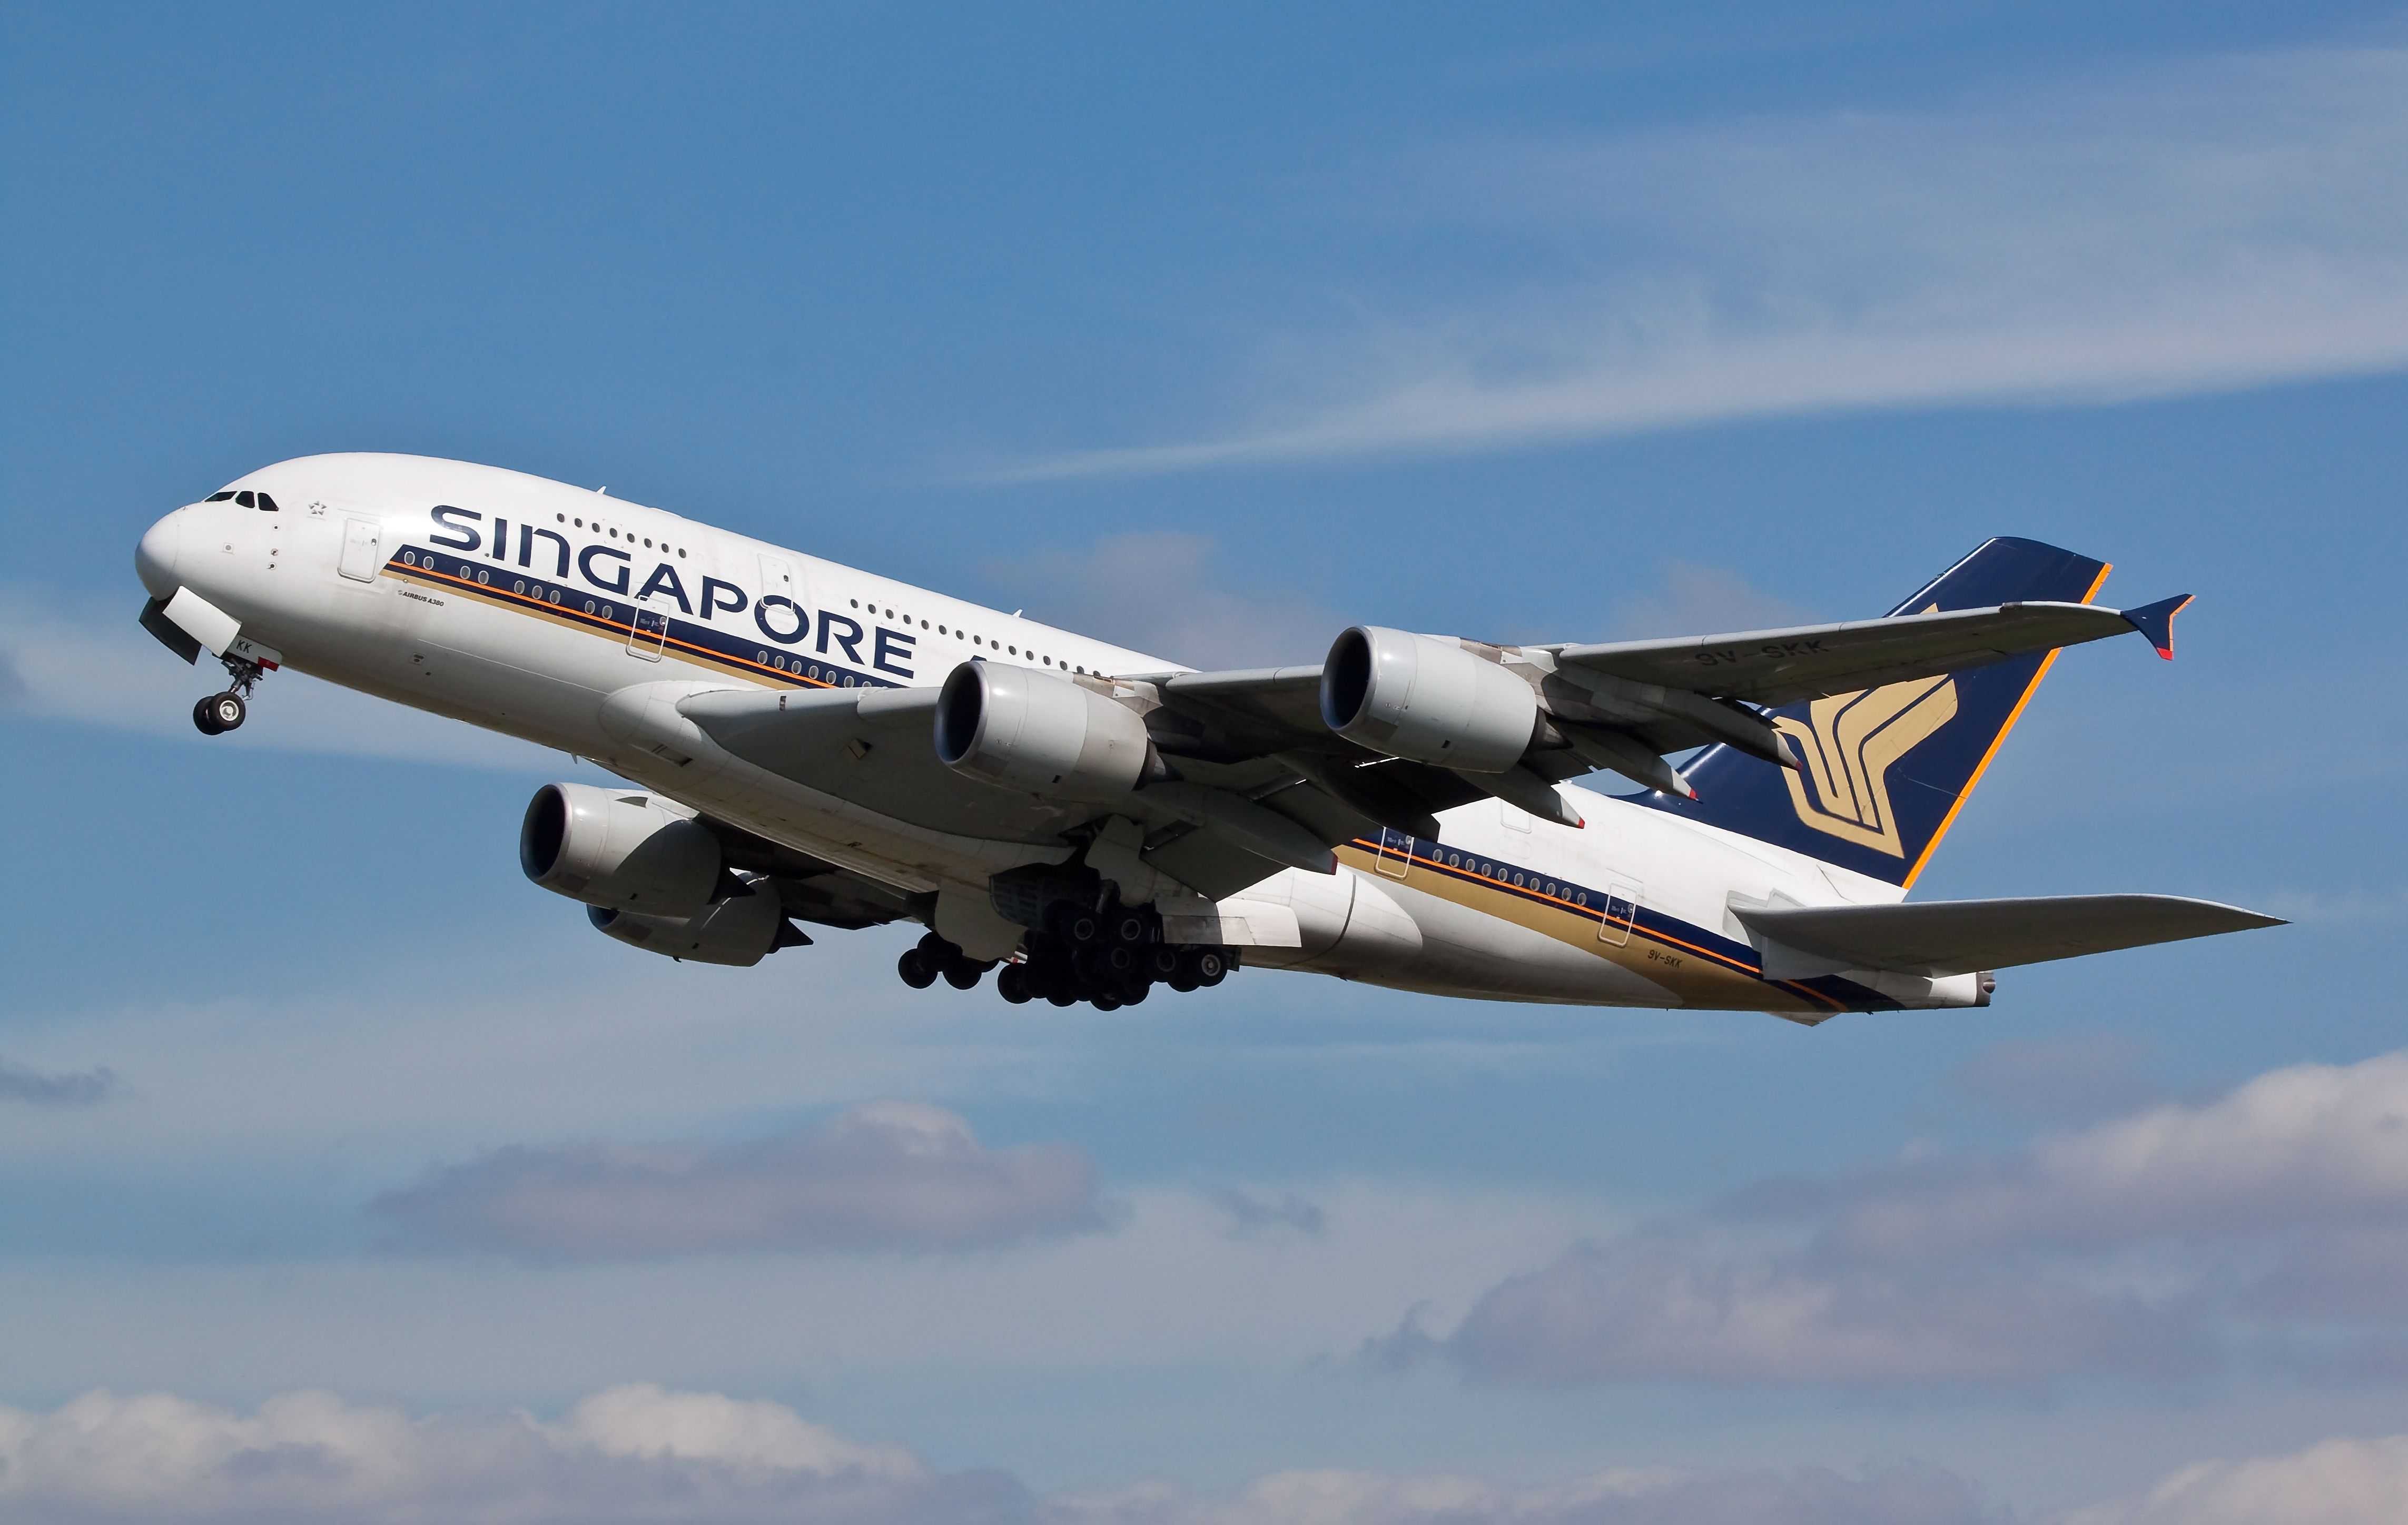 Singapore Airlines Airbus A380 taking off from London Heathrow Airport.